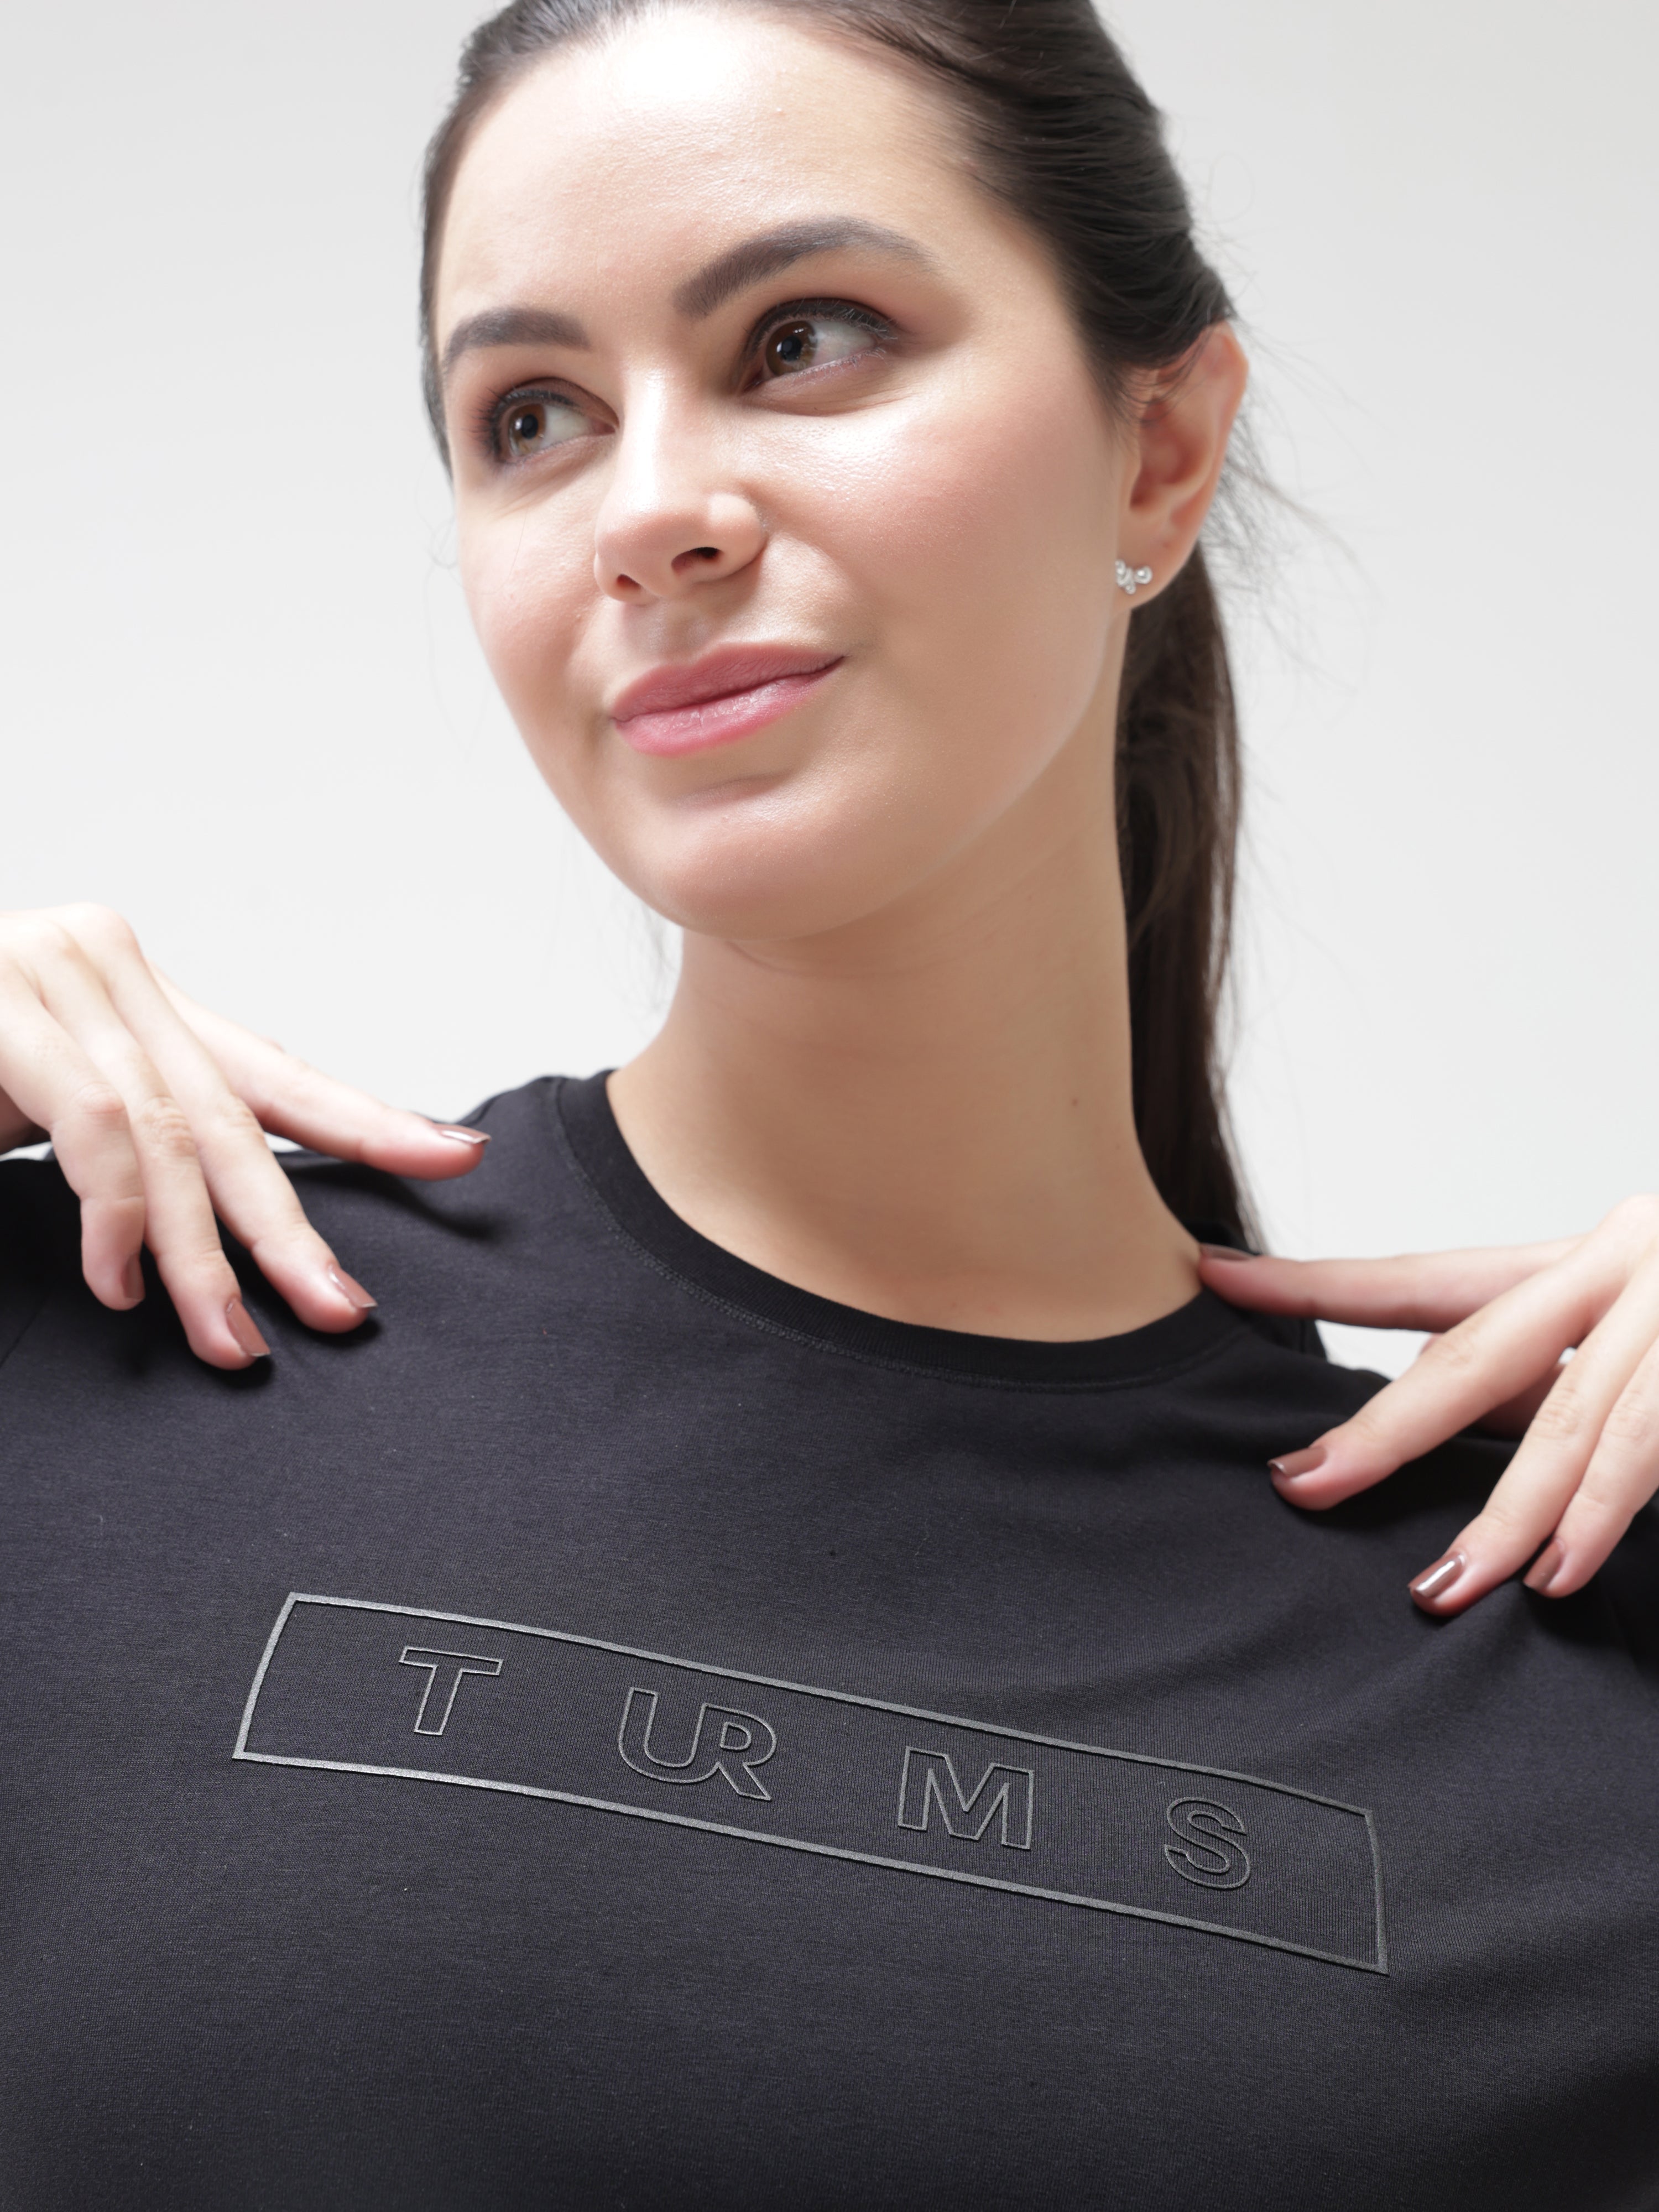 Woman wearing stain-proof and odor-resistant Turms T-shirt with round-neck, showcasing intelligent apparel technology, anti-stain, anti-odour, and stretchable fabric